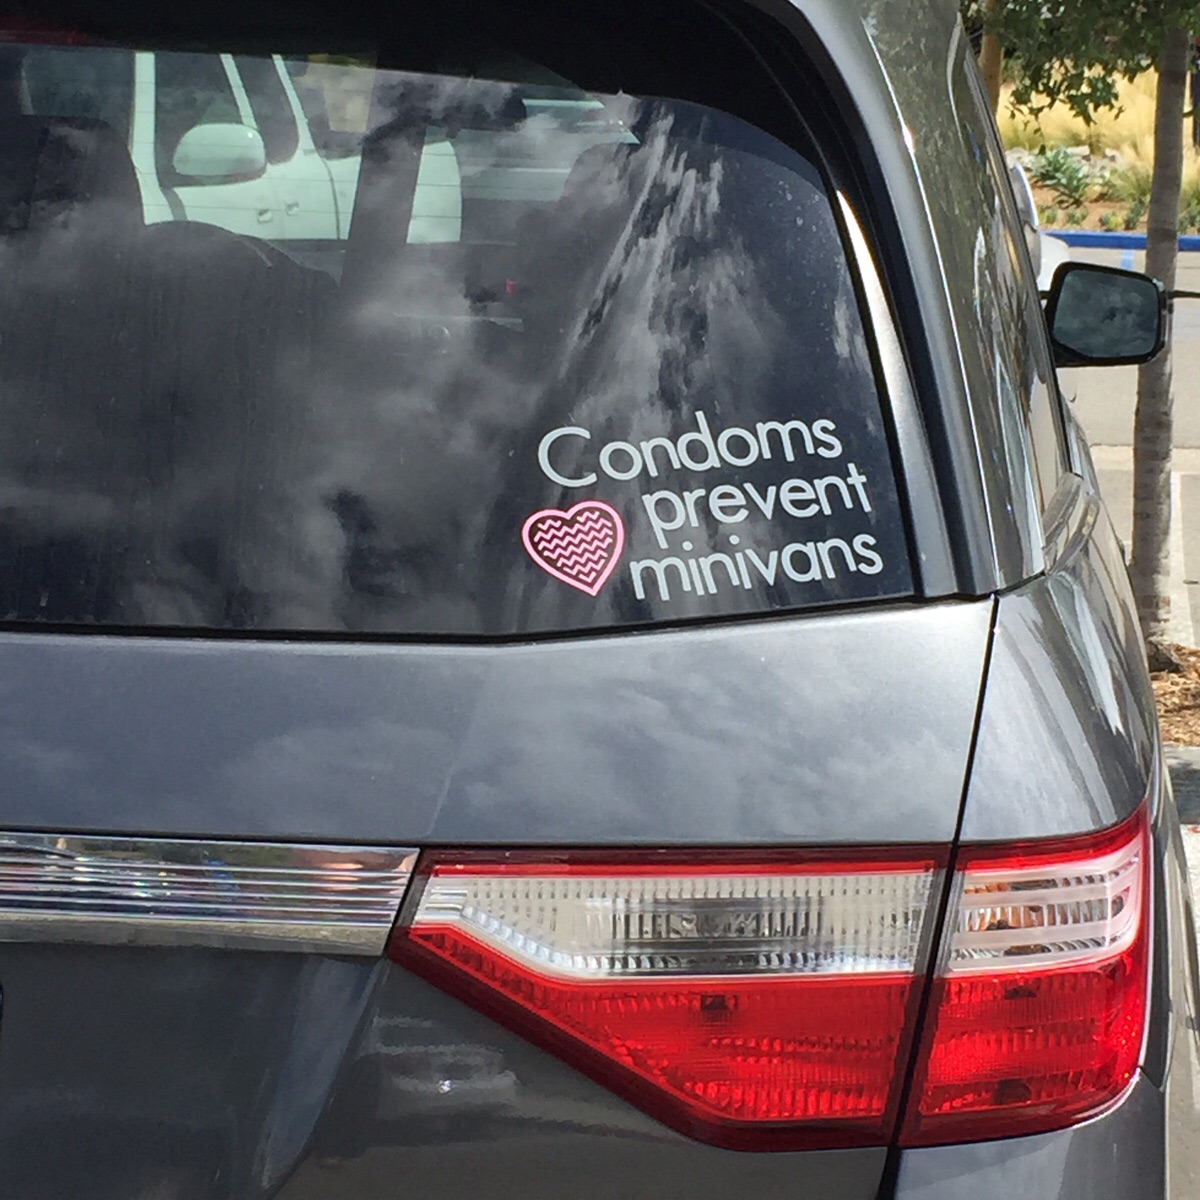 This sticker on a minivan. Even more perfect.